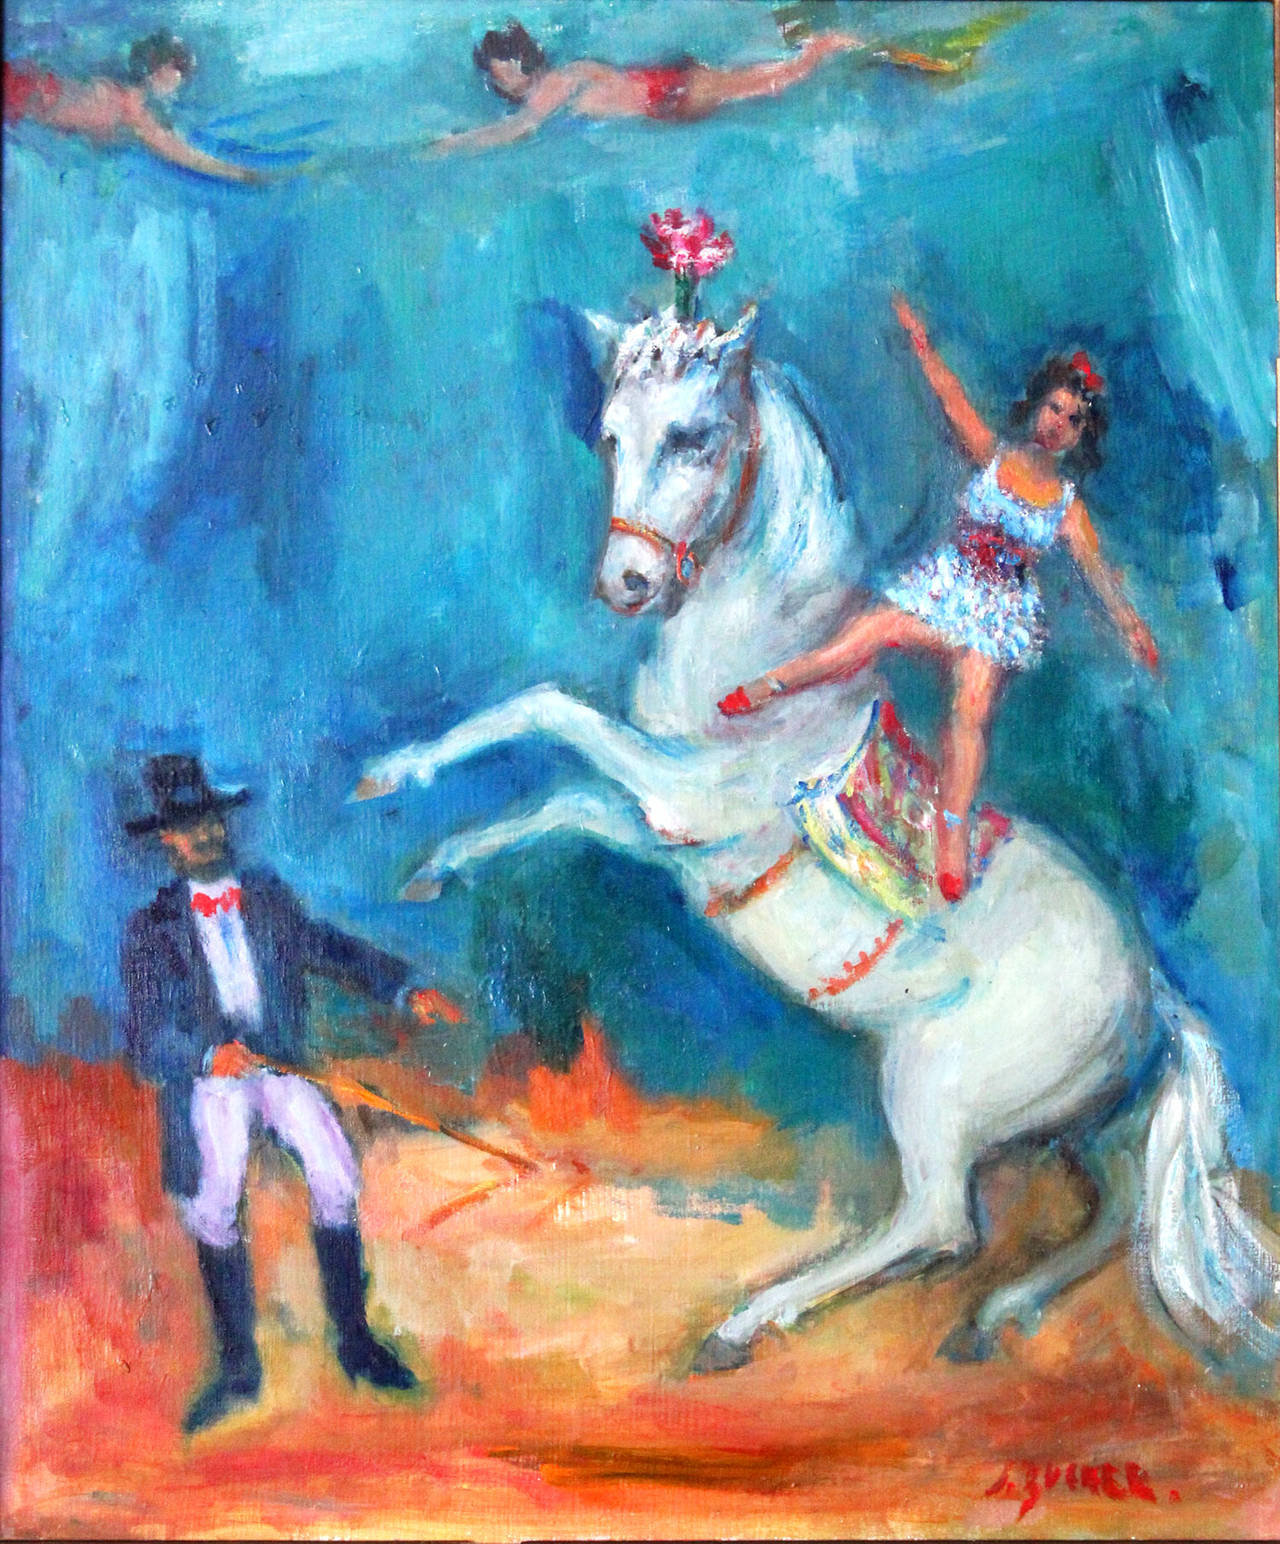 The Circus Performers - Painting by Jacques Zucker